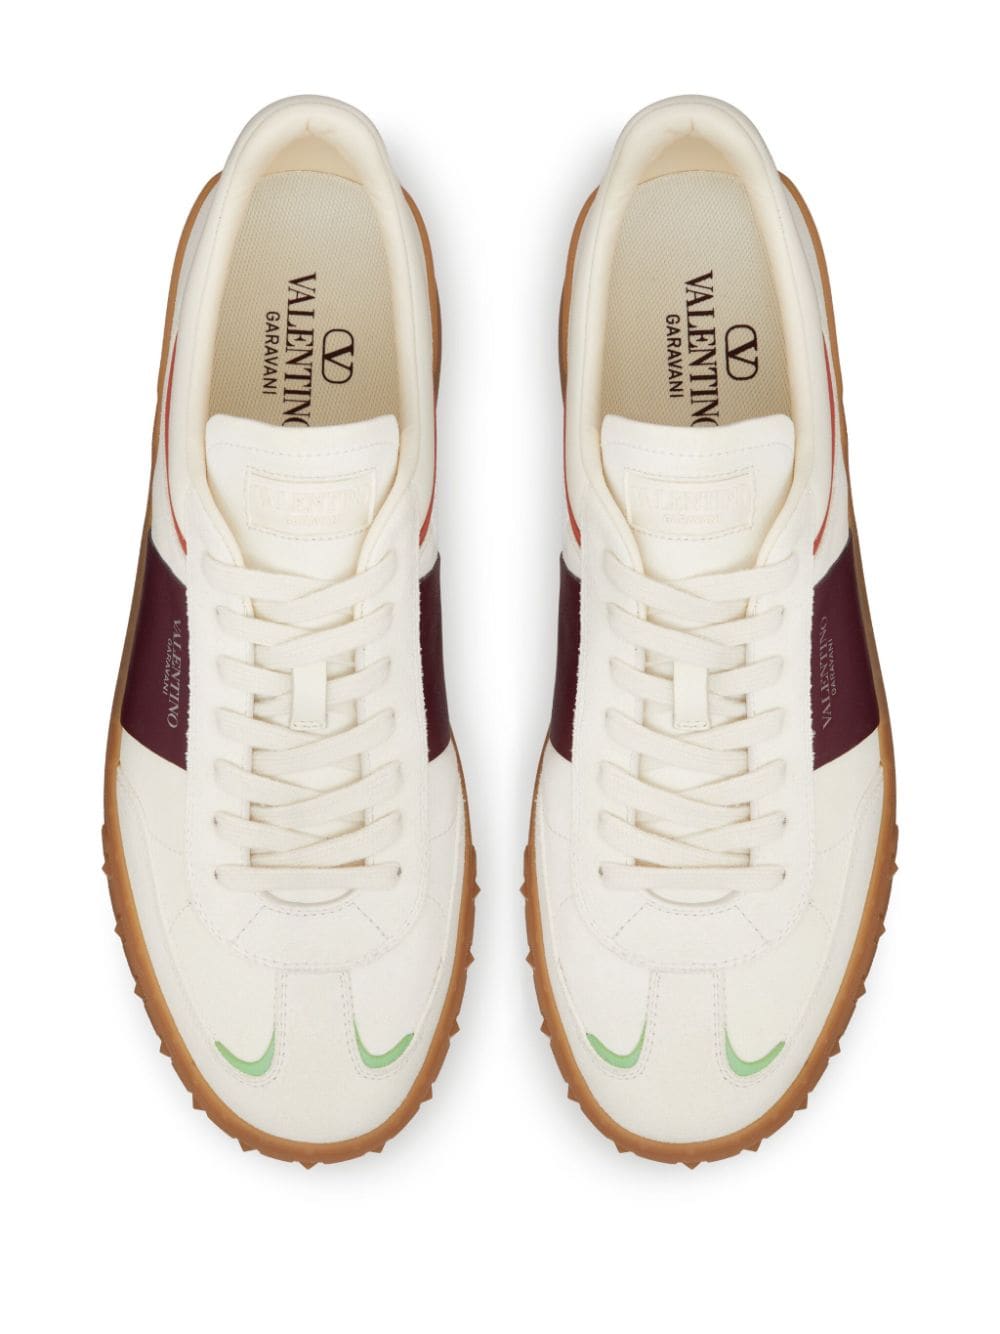 Upvillage low-top leather sneakers<BR/><BR/><BR/>